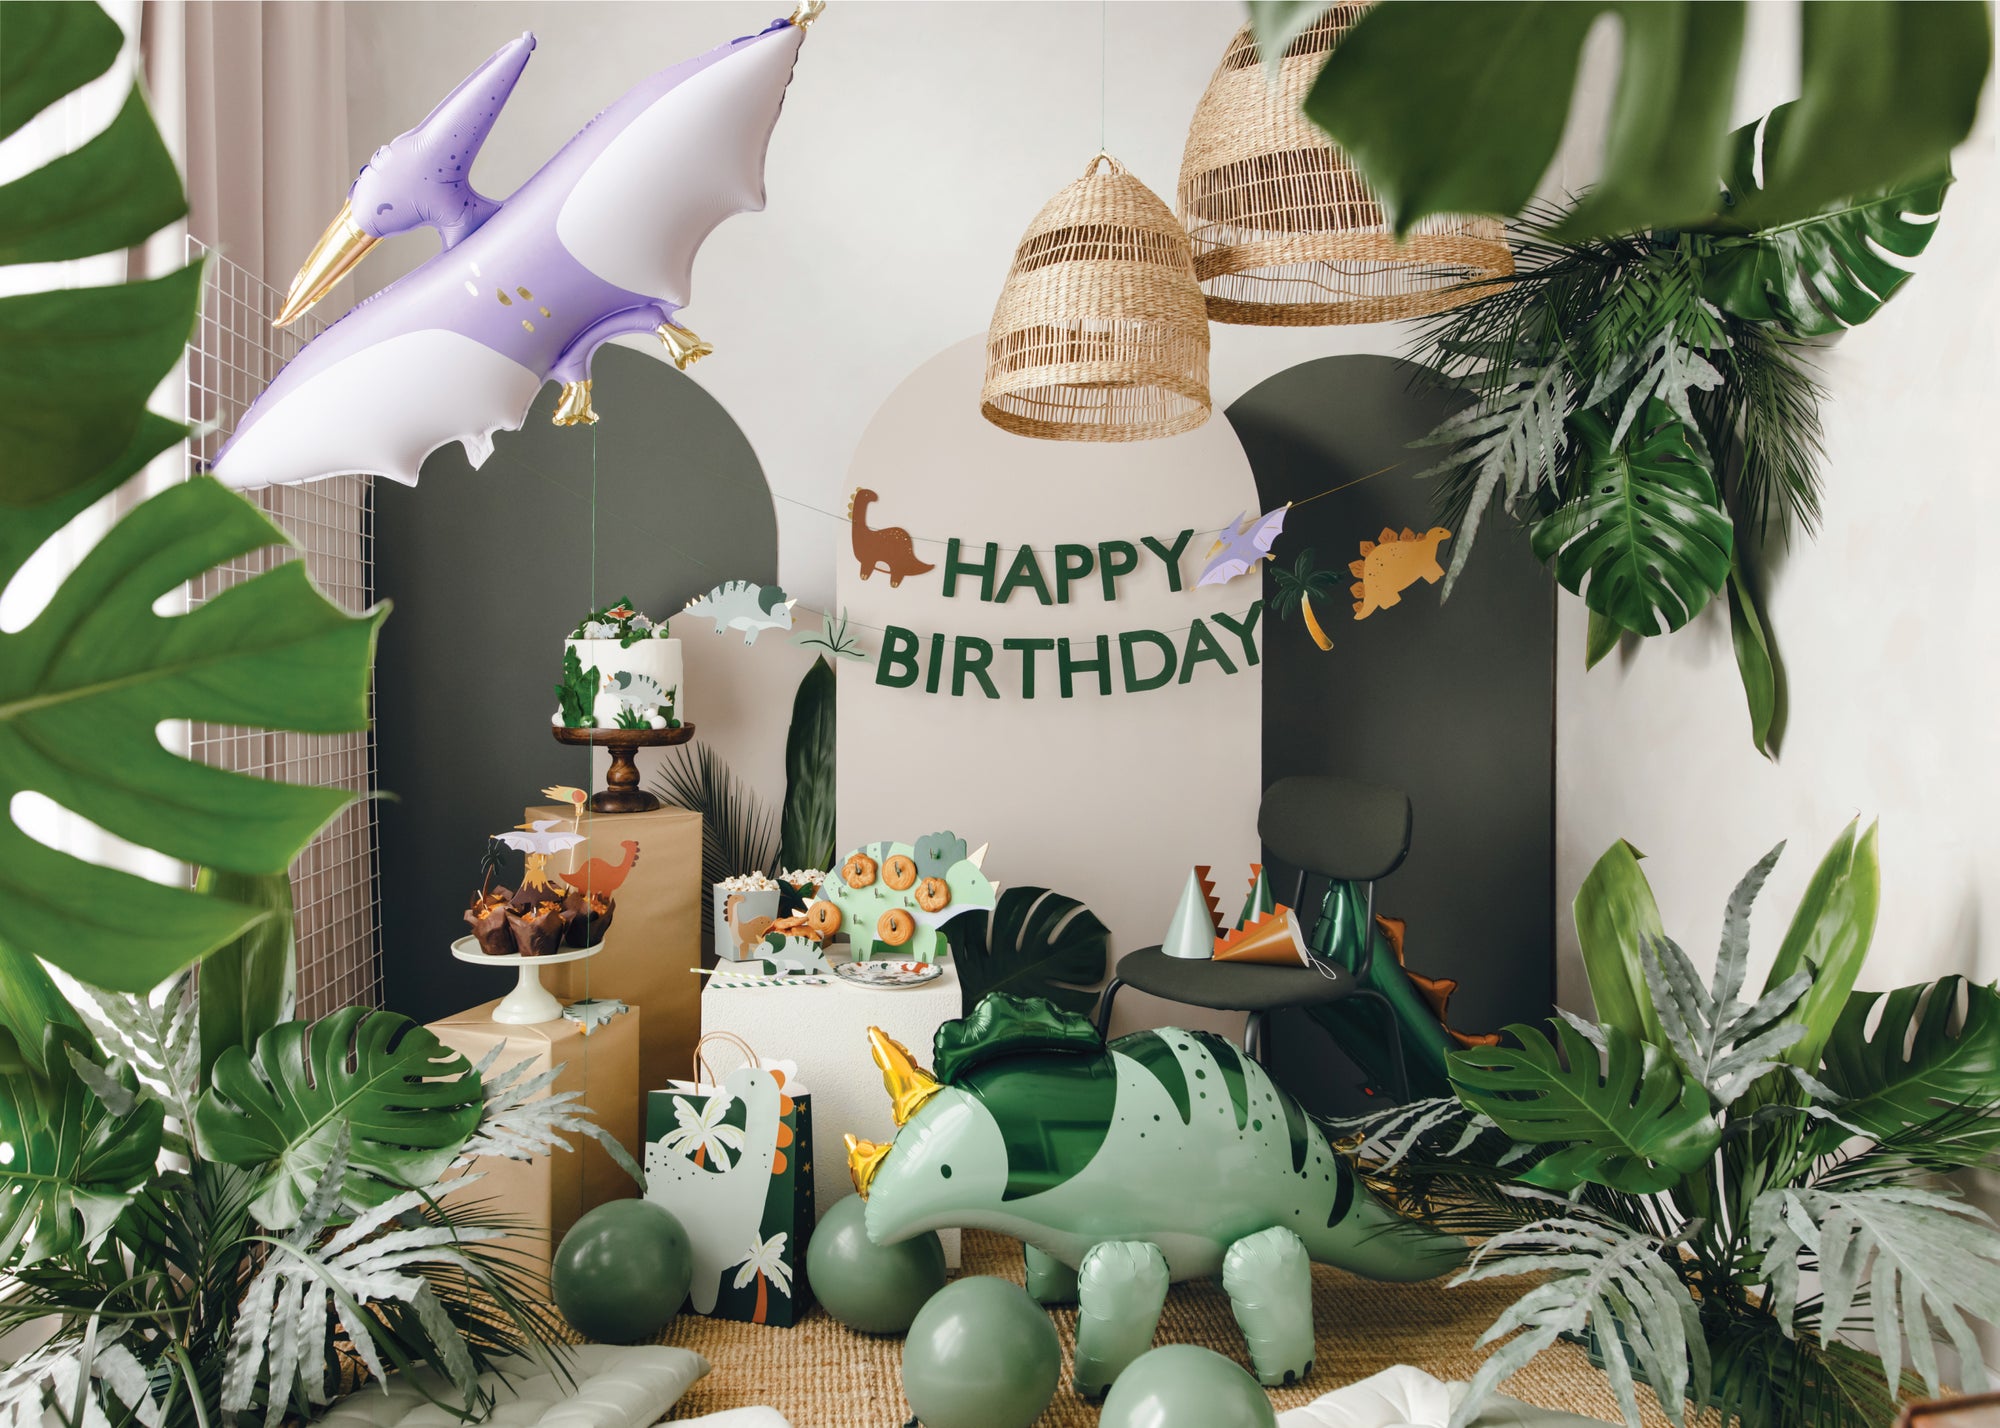 Green Triceratops Snack Wall | The Party Darling